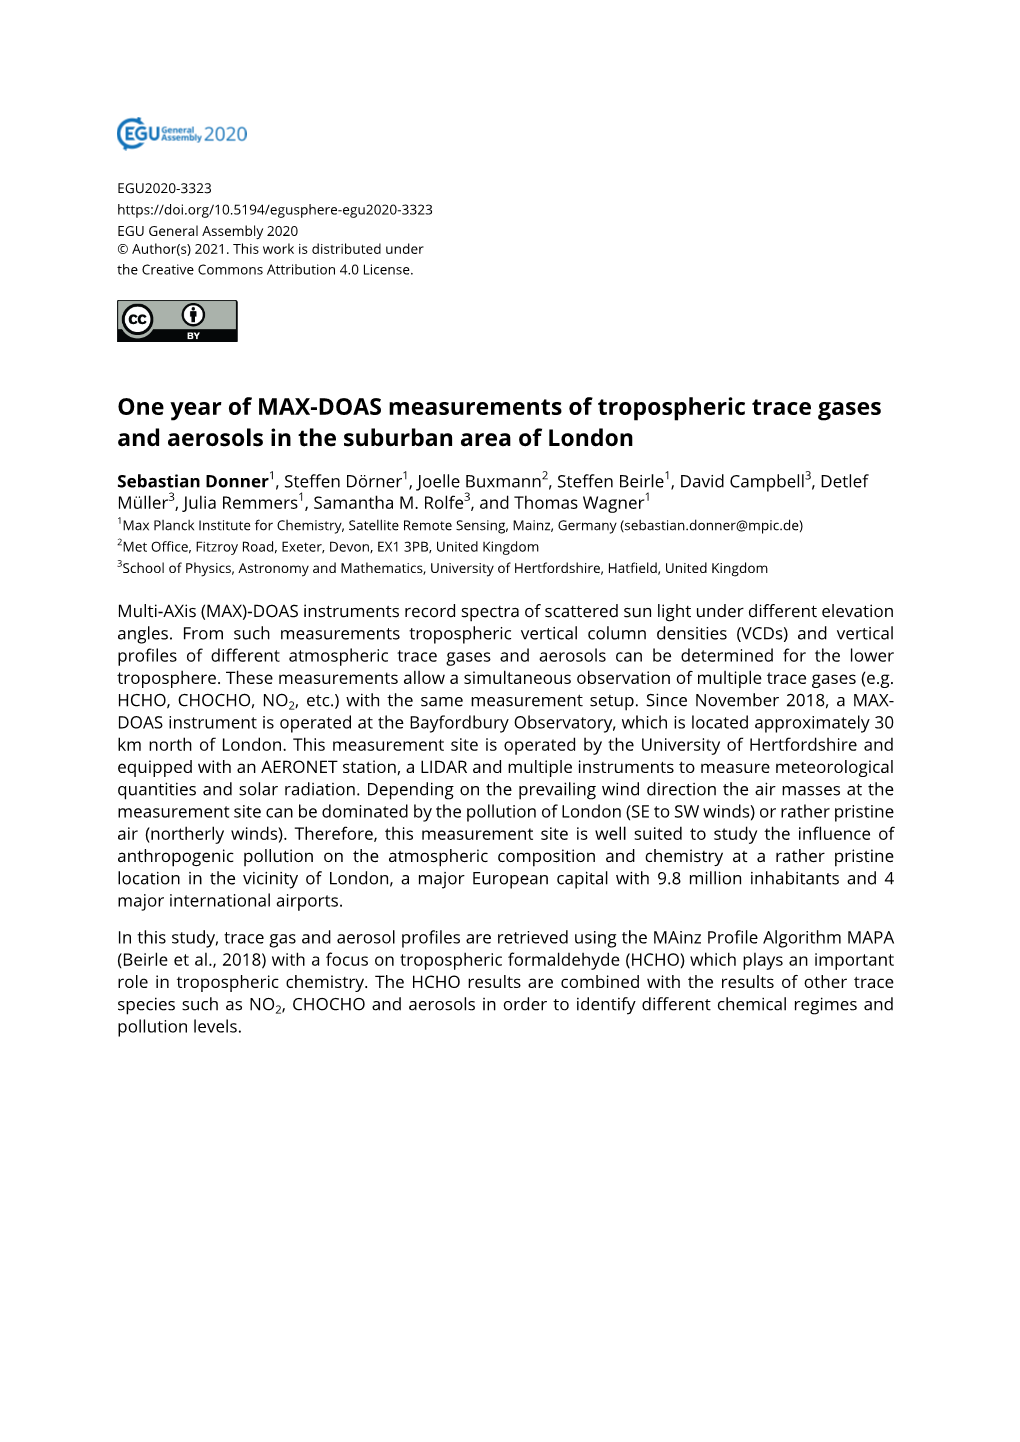 One Year of MAX-DOAS Measurements of Tropospheric Trace Gases and Aerosols in the Suburban Area of London